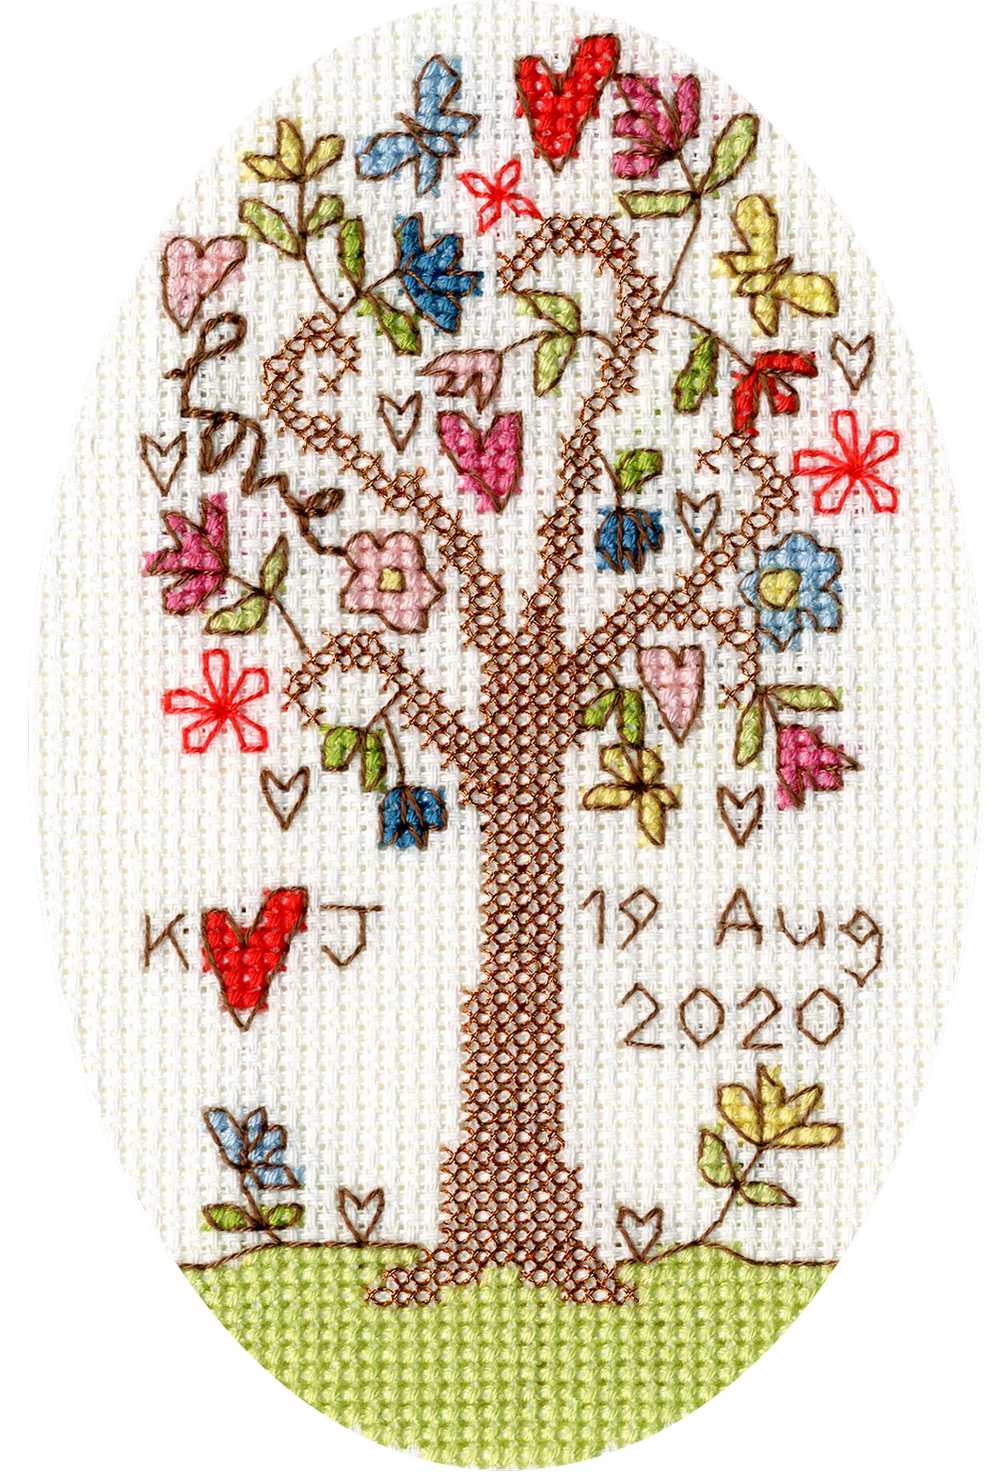 Sweet Tree Card - Counted Cross Stitch Greetings Card Kit From Bothy Threads